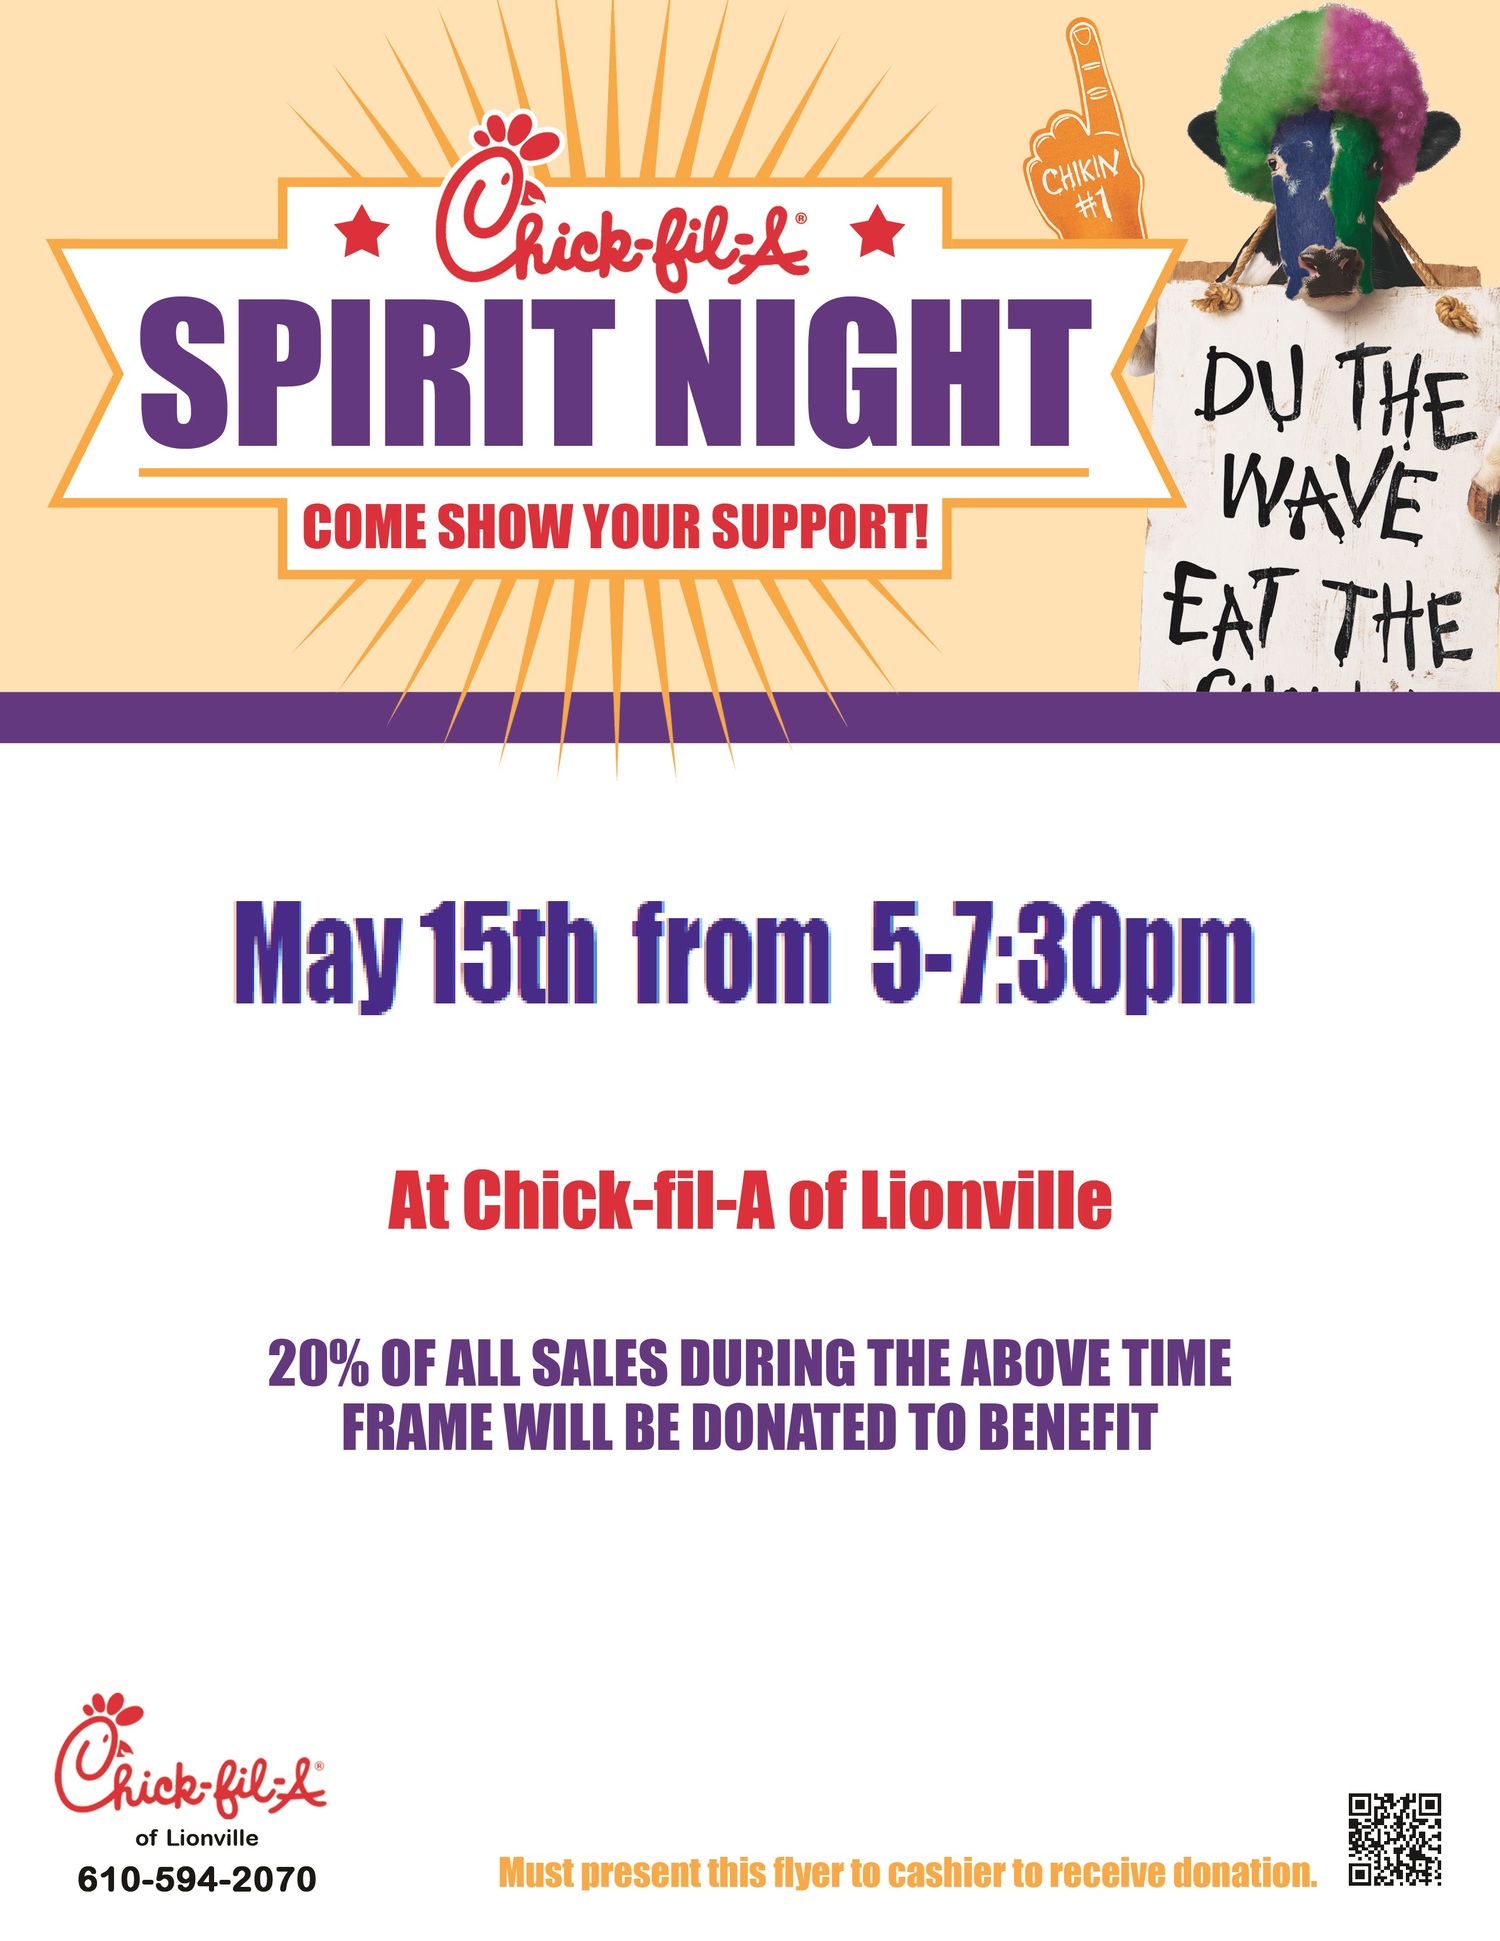 chick fil a fundraiser flyer template, chick-fil-a fundraiser flyer template, chick fil a spirit night flyer template, chick fil a flyer template, food fundraiser flyer template word free